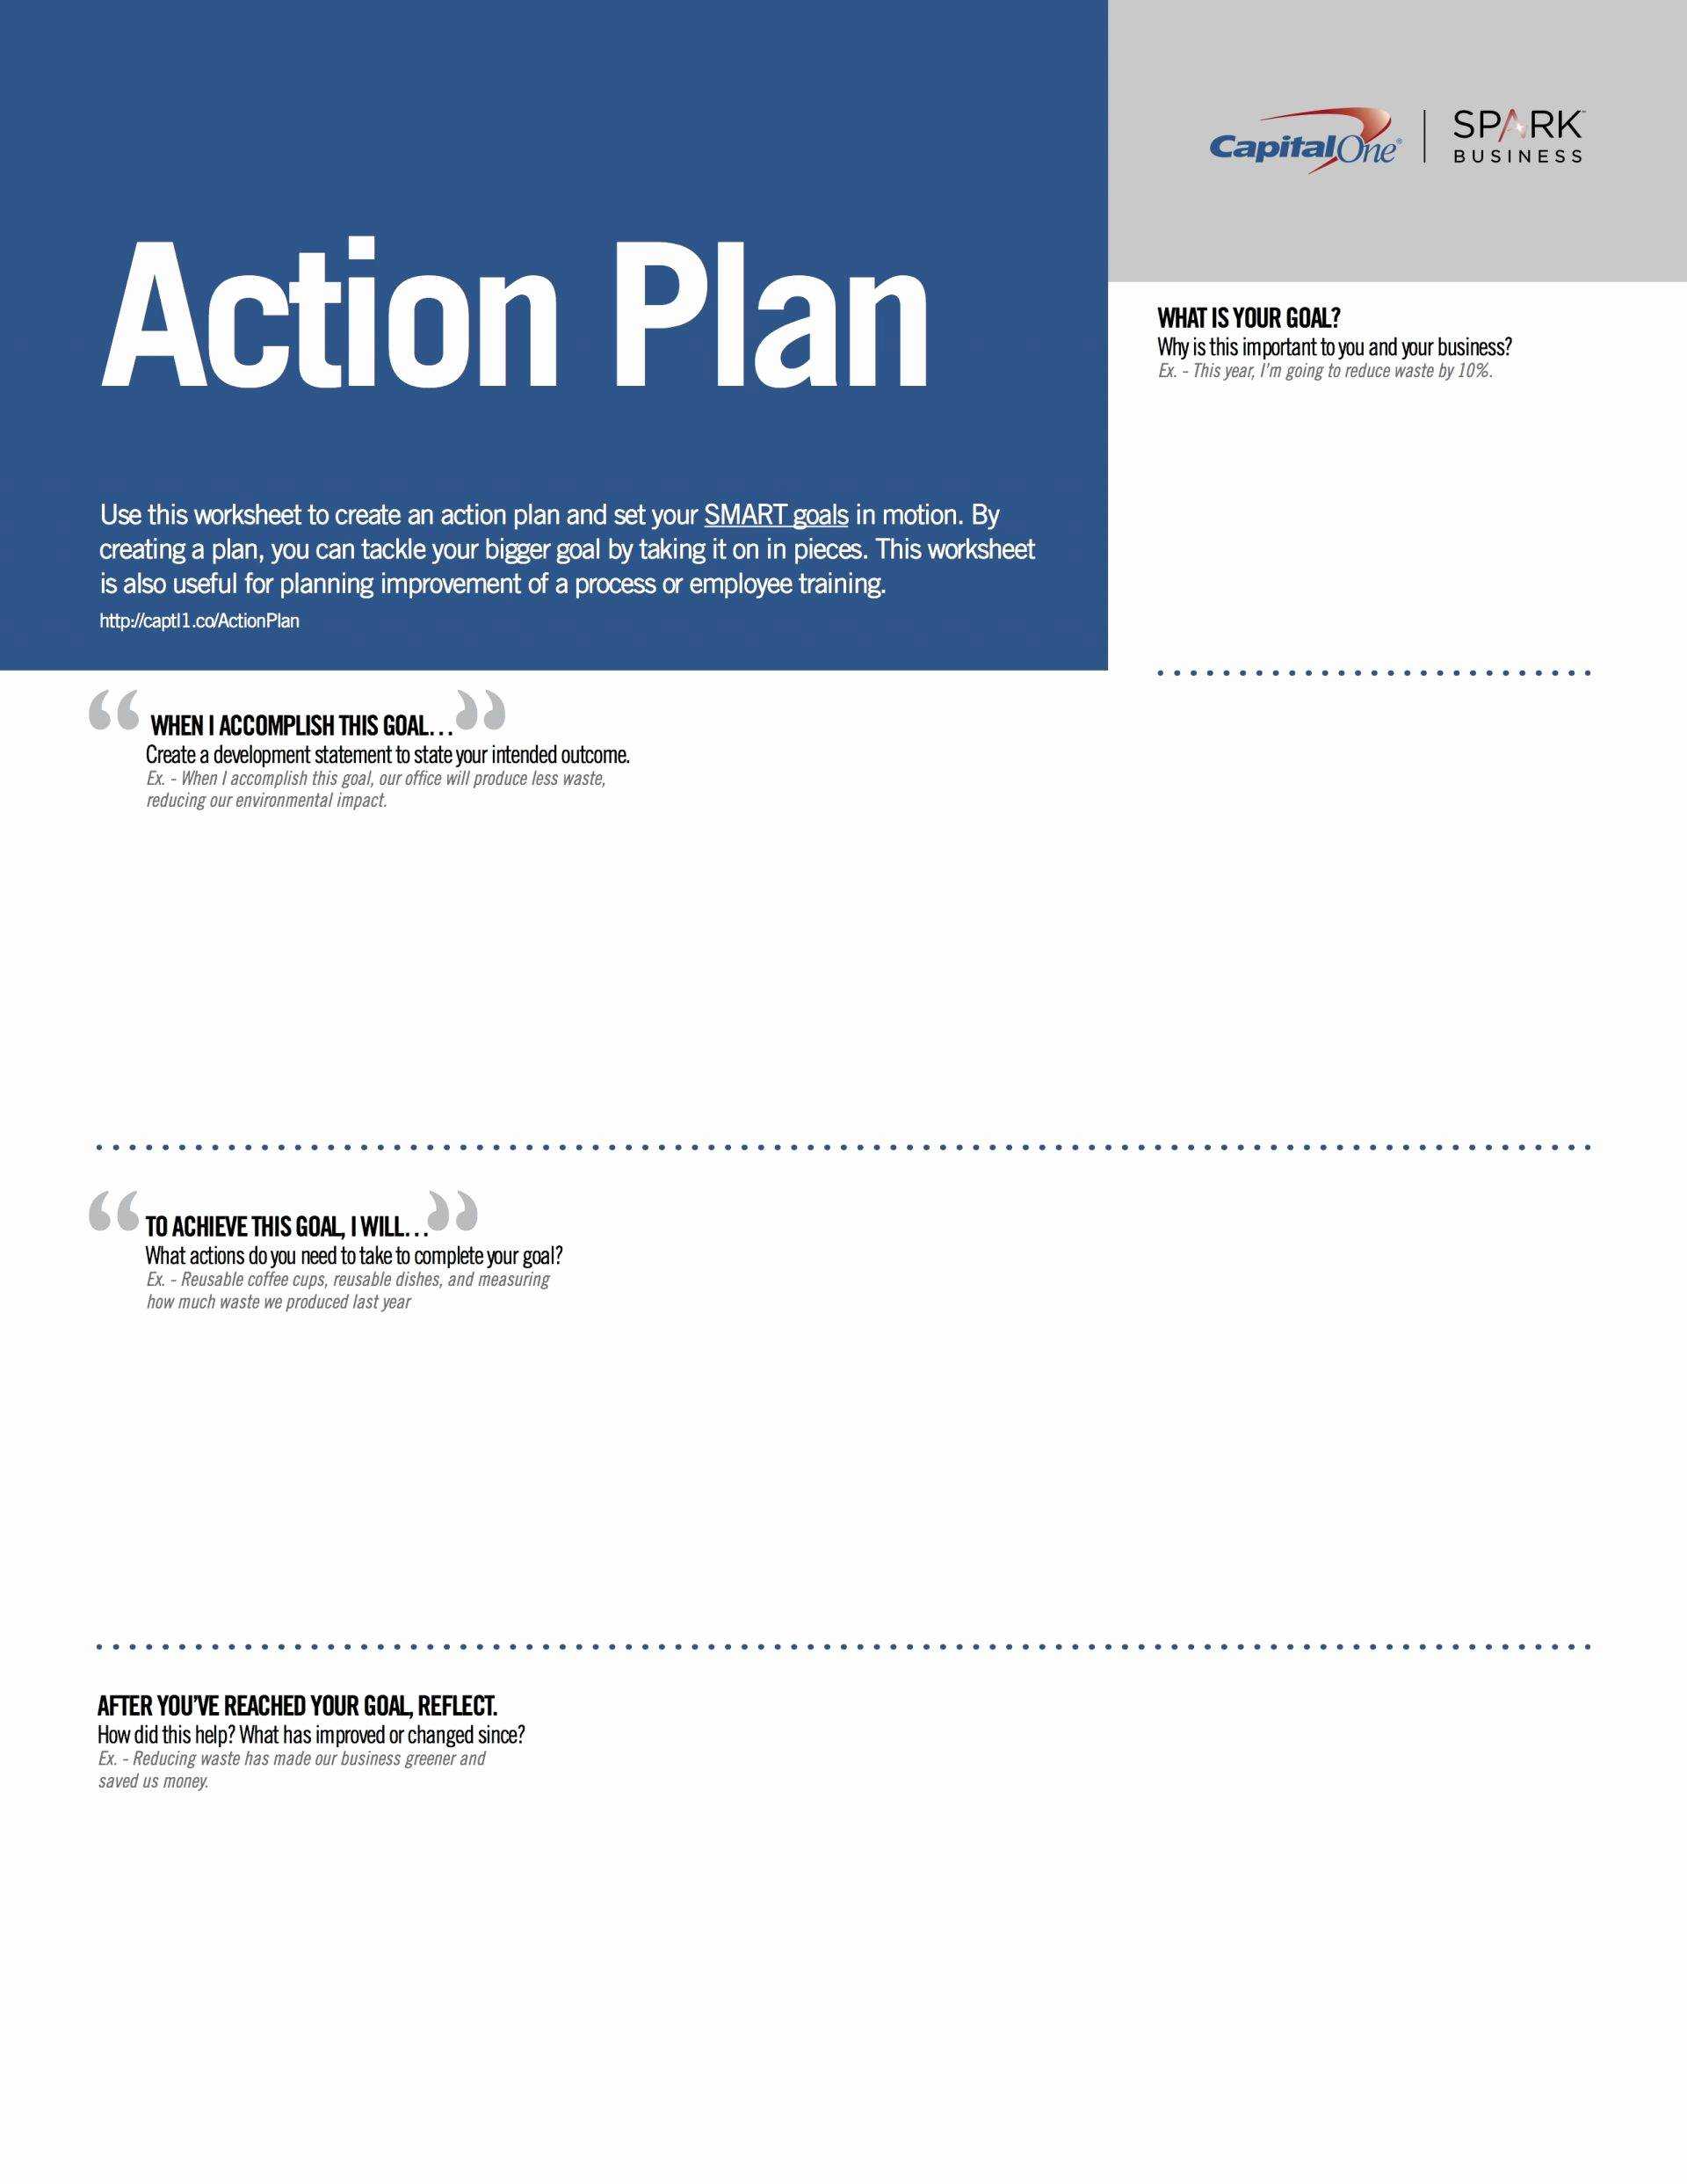 Wellness Recovery Action Plan Worksheets together with Affirmative Action Plan Template for Small Business Best Develop